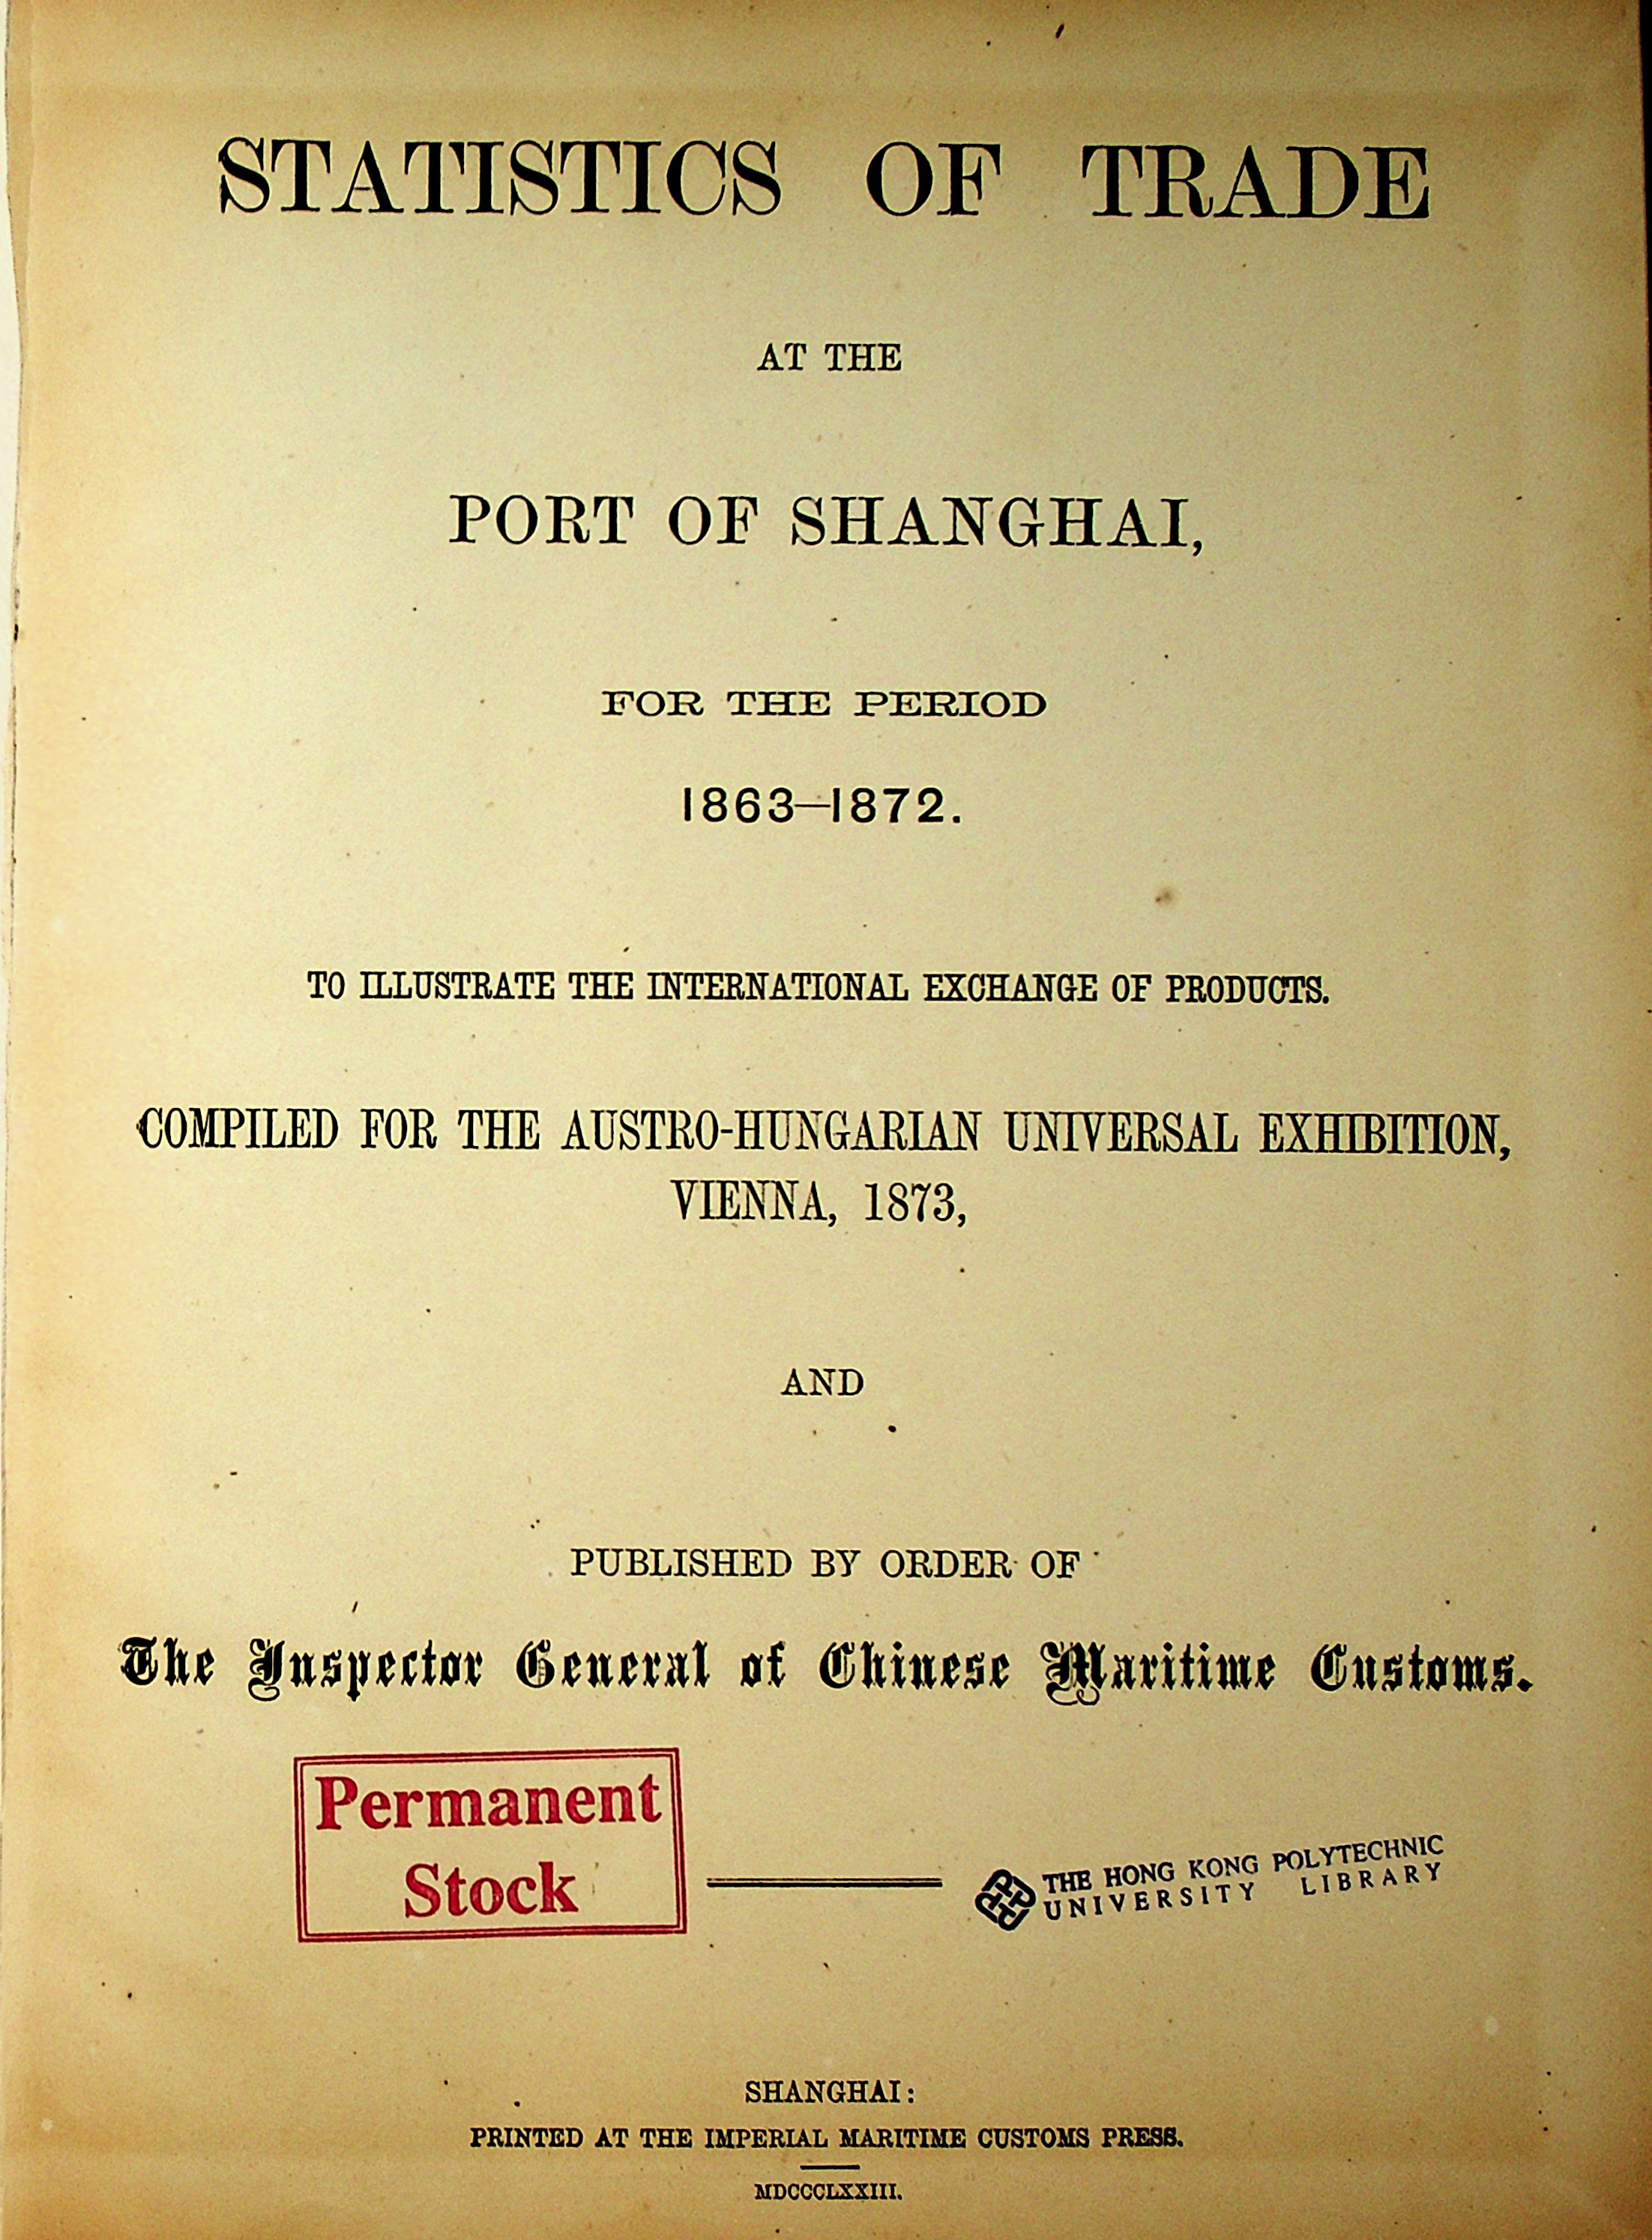 Statistics of trade at the port of Shanghai, for the period 1863-1872